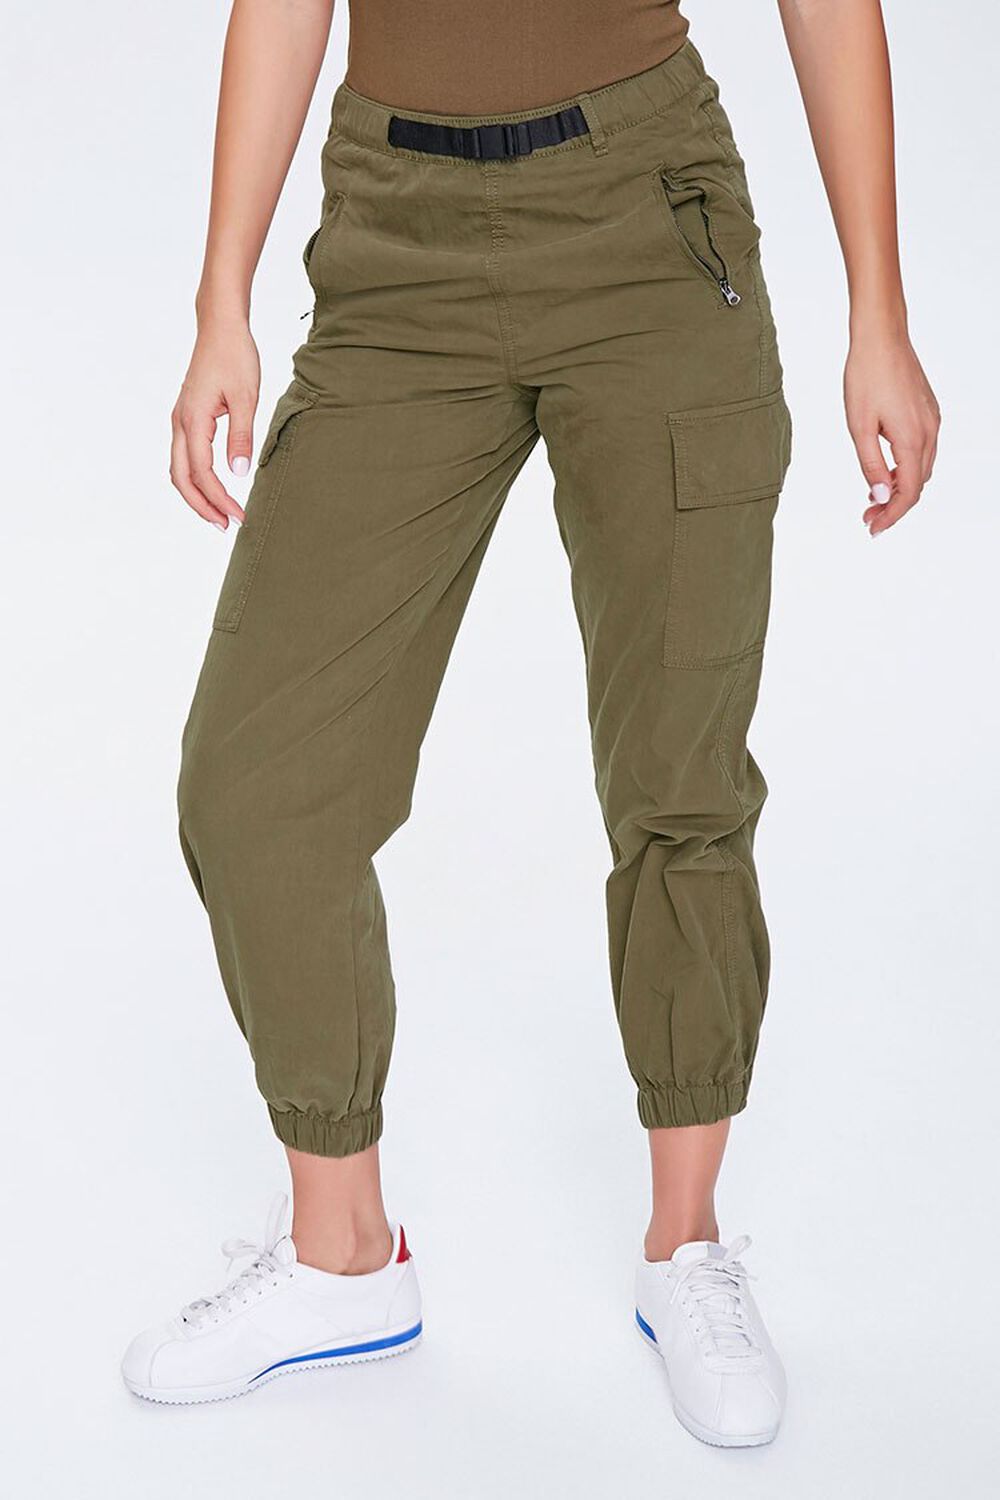 OLIVE Buckled Cargo Ankle Joggers, image 2